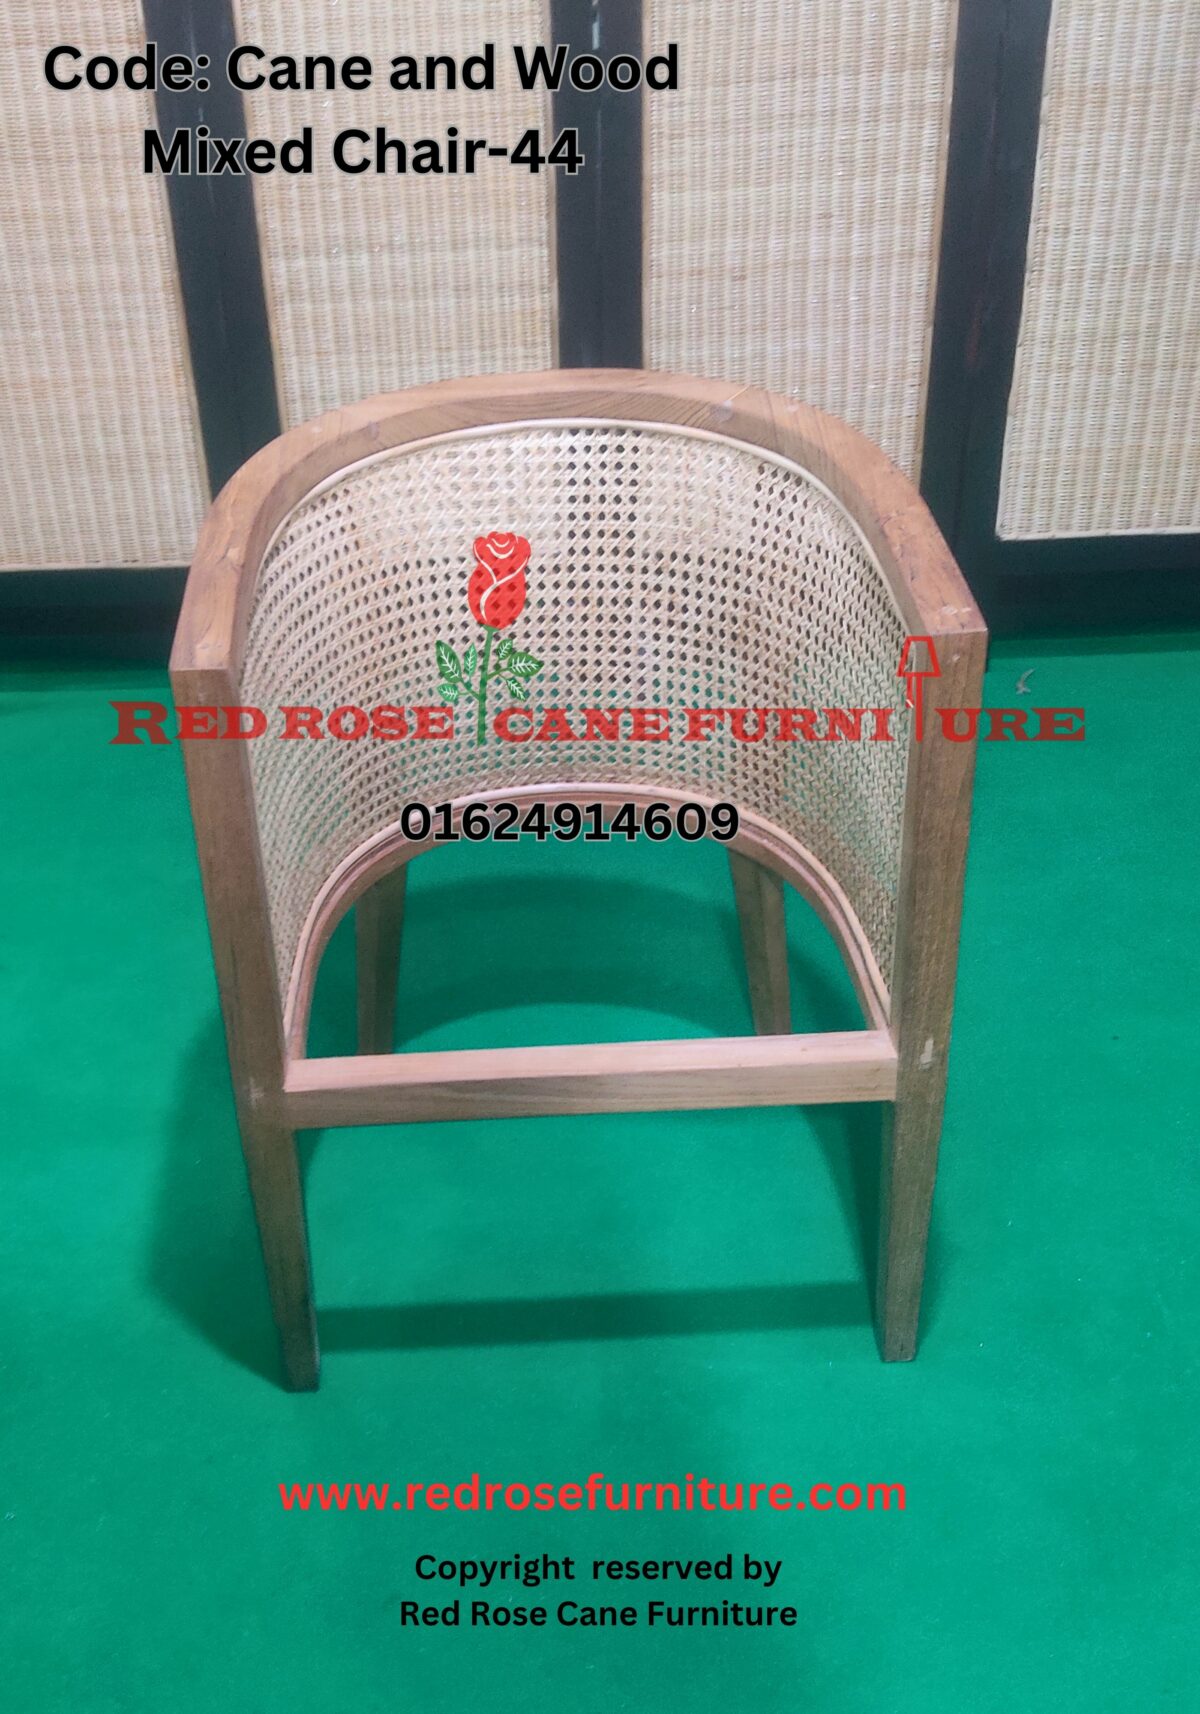 Cane and Wood Mixed Chair-44